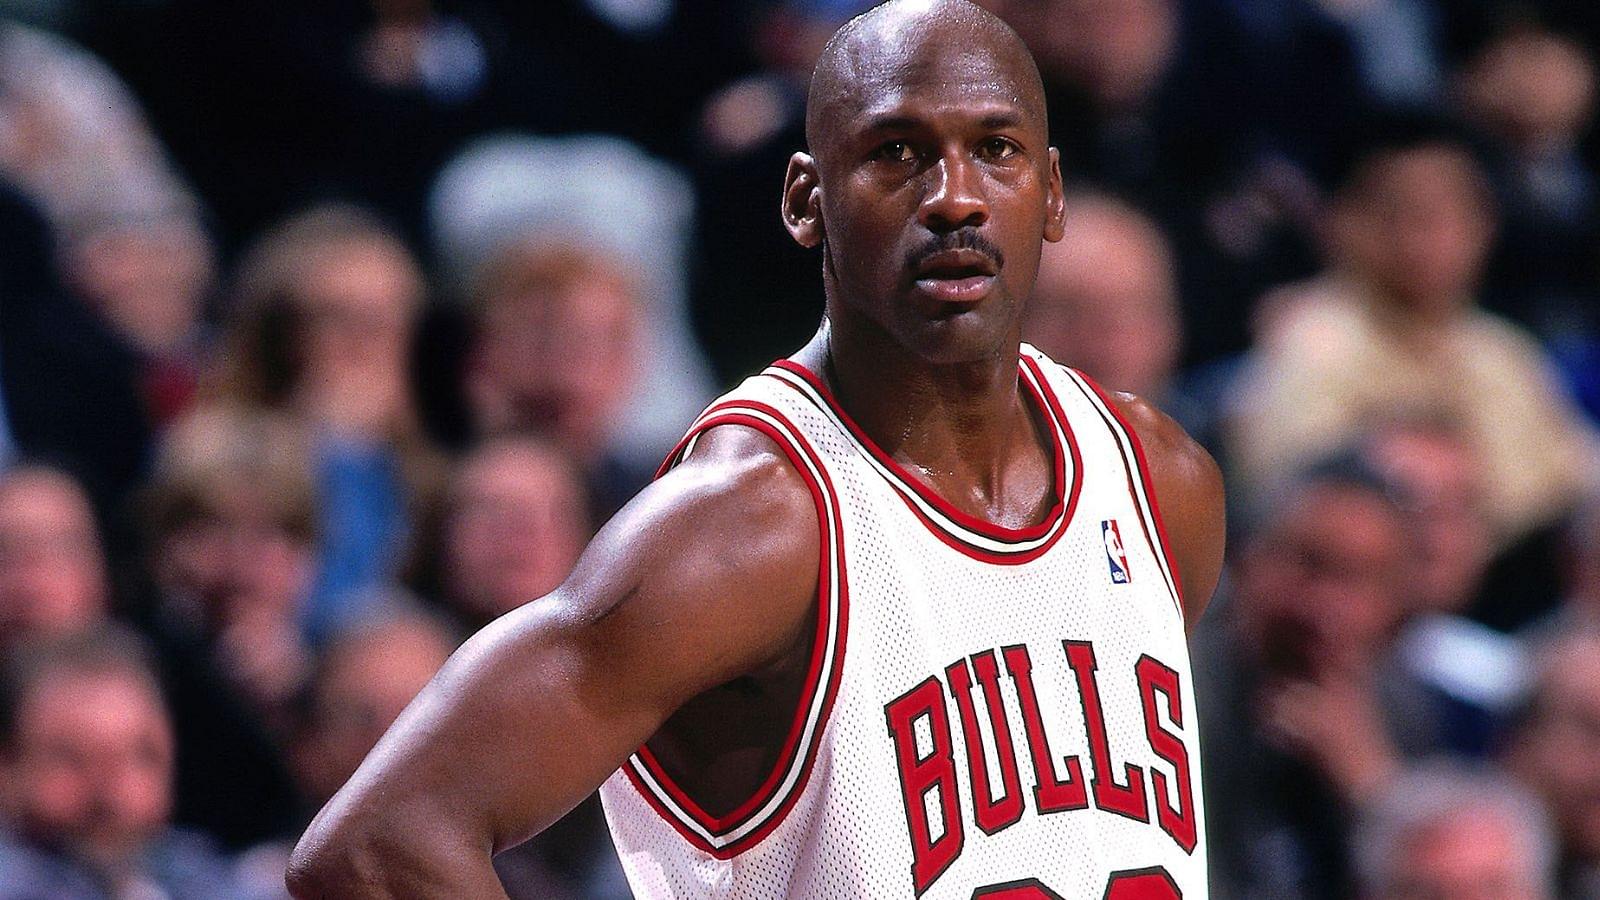 6x NBA Champ Michael Jordan explains why ‘love for the game’ was the reason for not coaching his kids